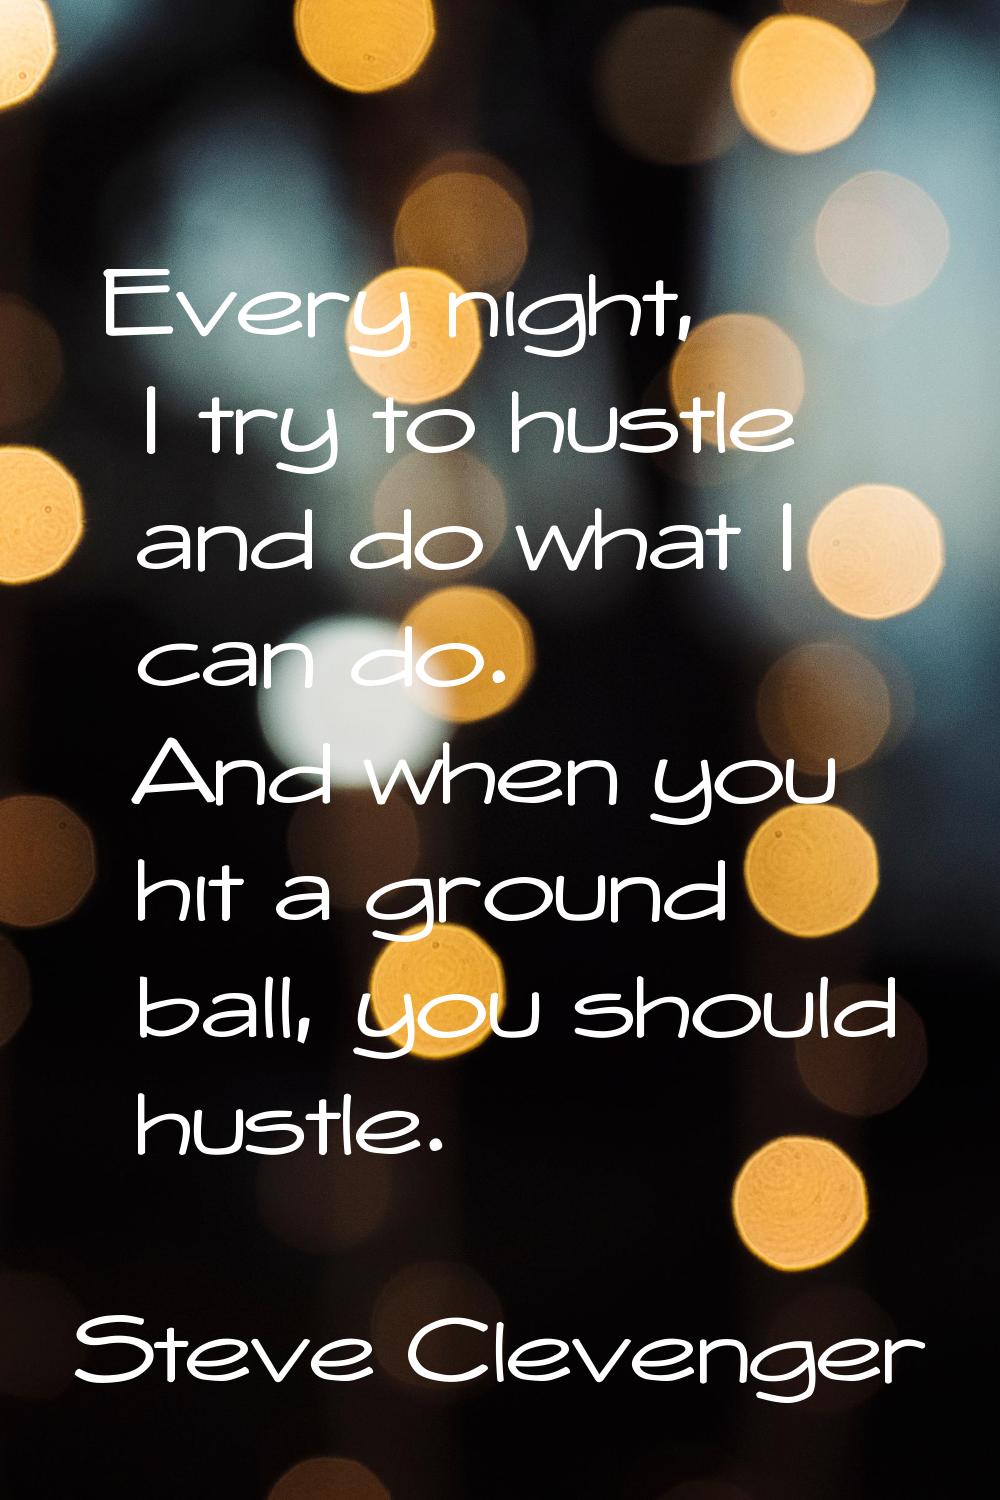 Every night, I try to hustle and do what I can do. And when you hit a ground ball, you should hustl